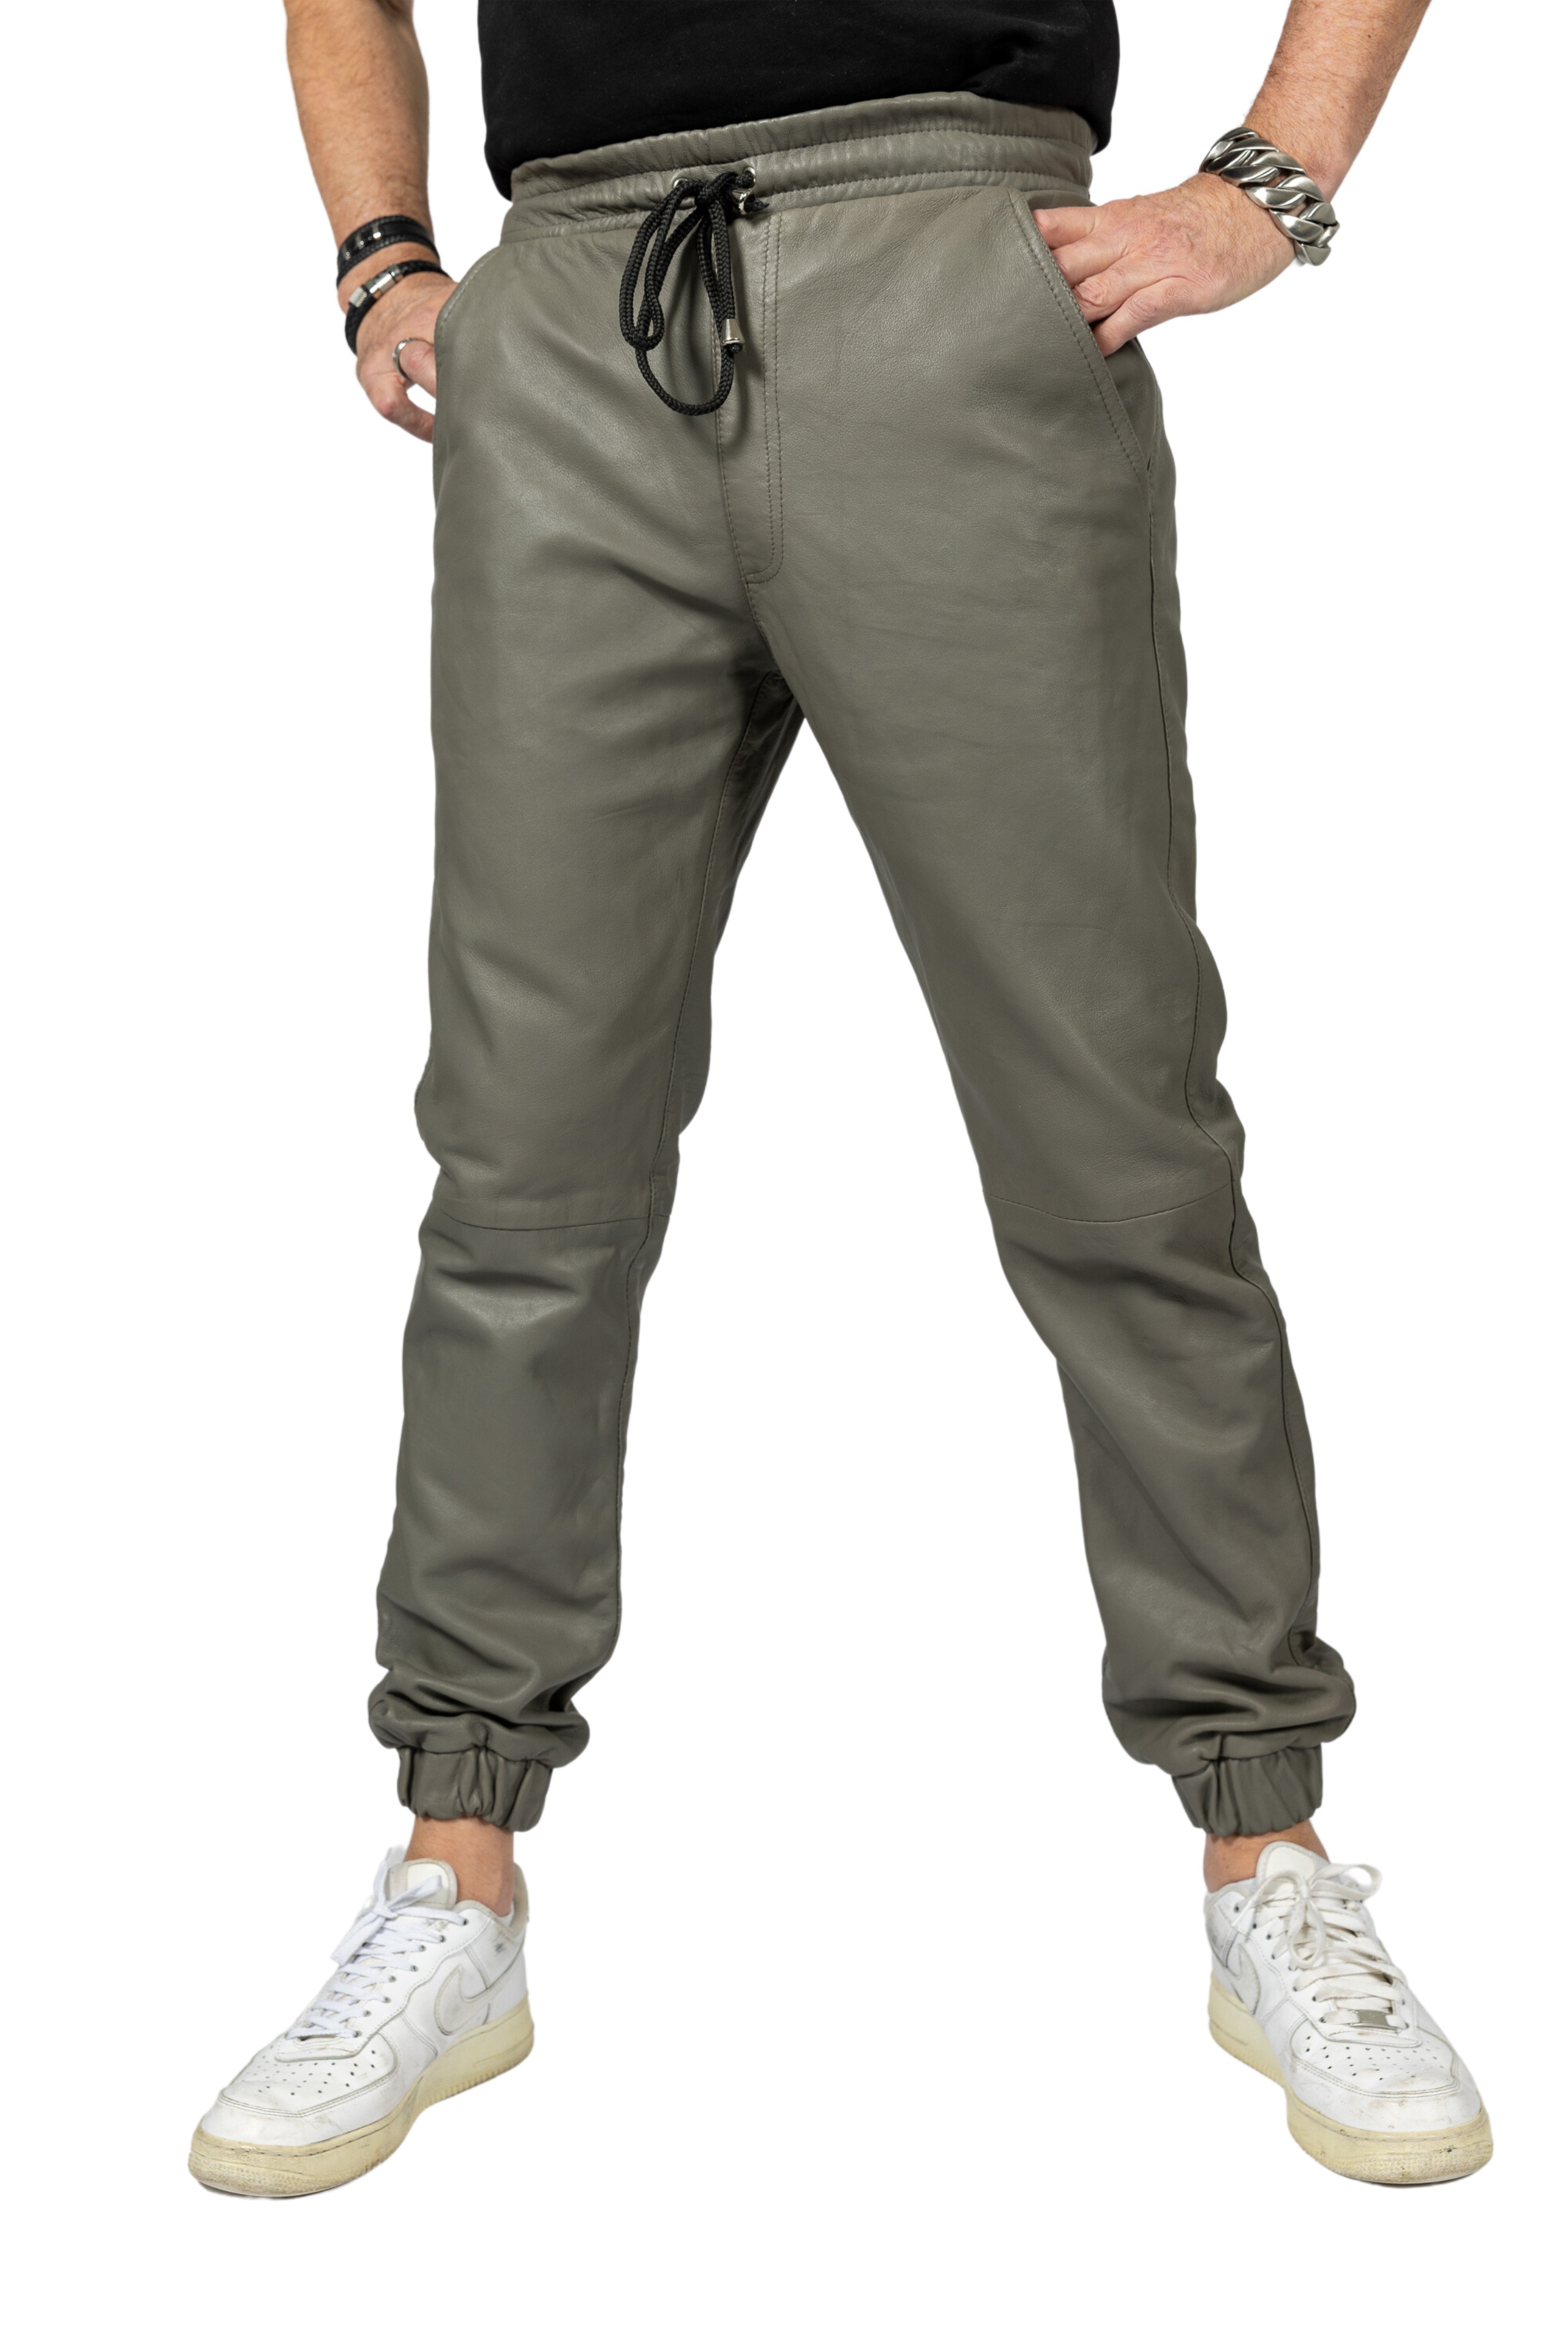 Jogging Trousers in GENUINE LEATHER in grey